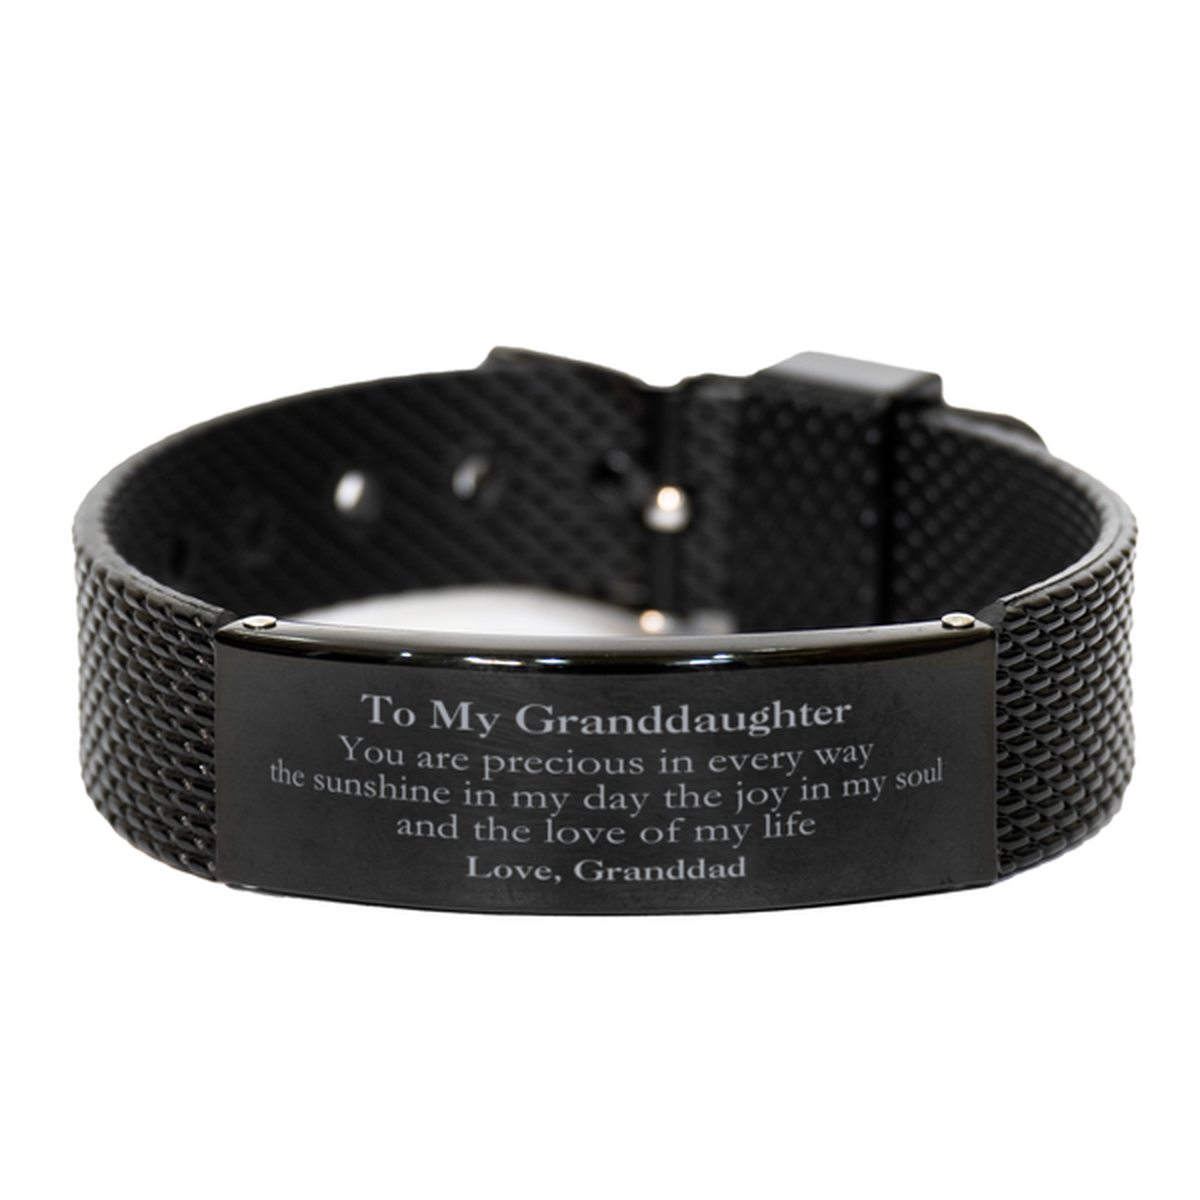 Graduation Gifts for Granddaughter Black Shark Mesh Bracelet Present from Granddad, Christmas Granddaughter Birthday Gifts Granddaughter You are precious in every way the sunshine in my day. Love, Granddad